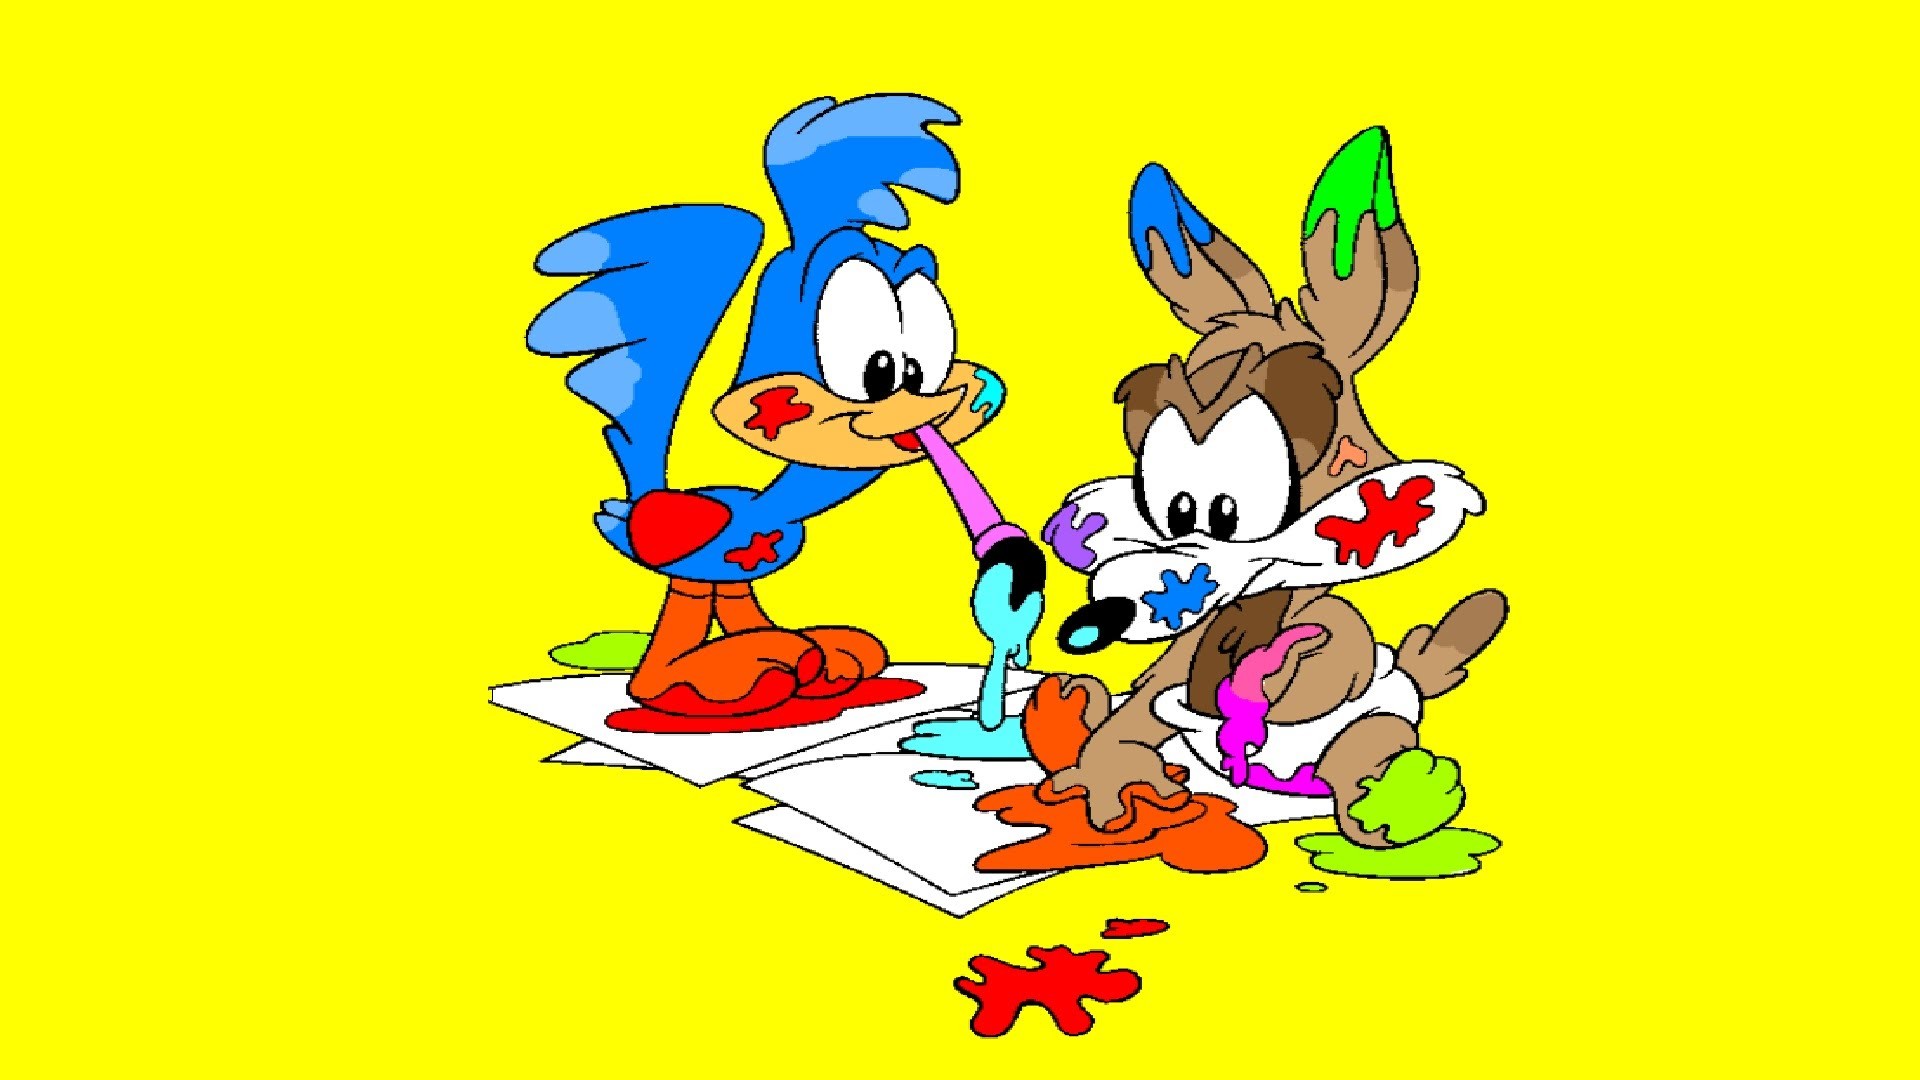 Baby Road Runner And Baby Wile E. Coyote Finger Painting | Coloring Pages –  YouTube